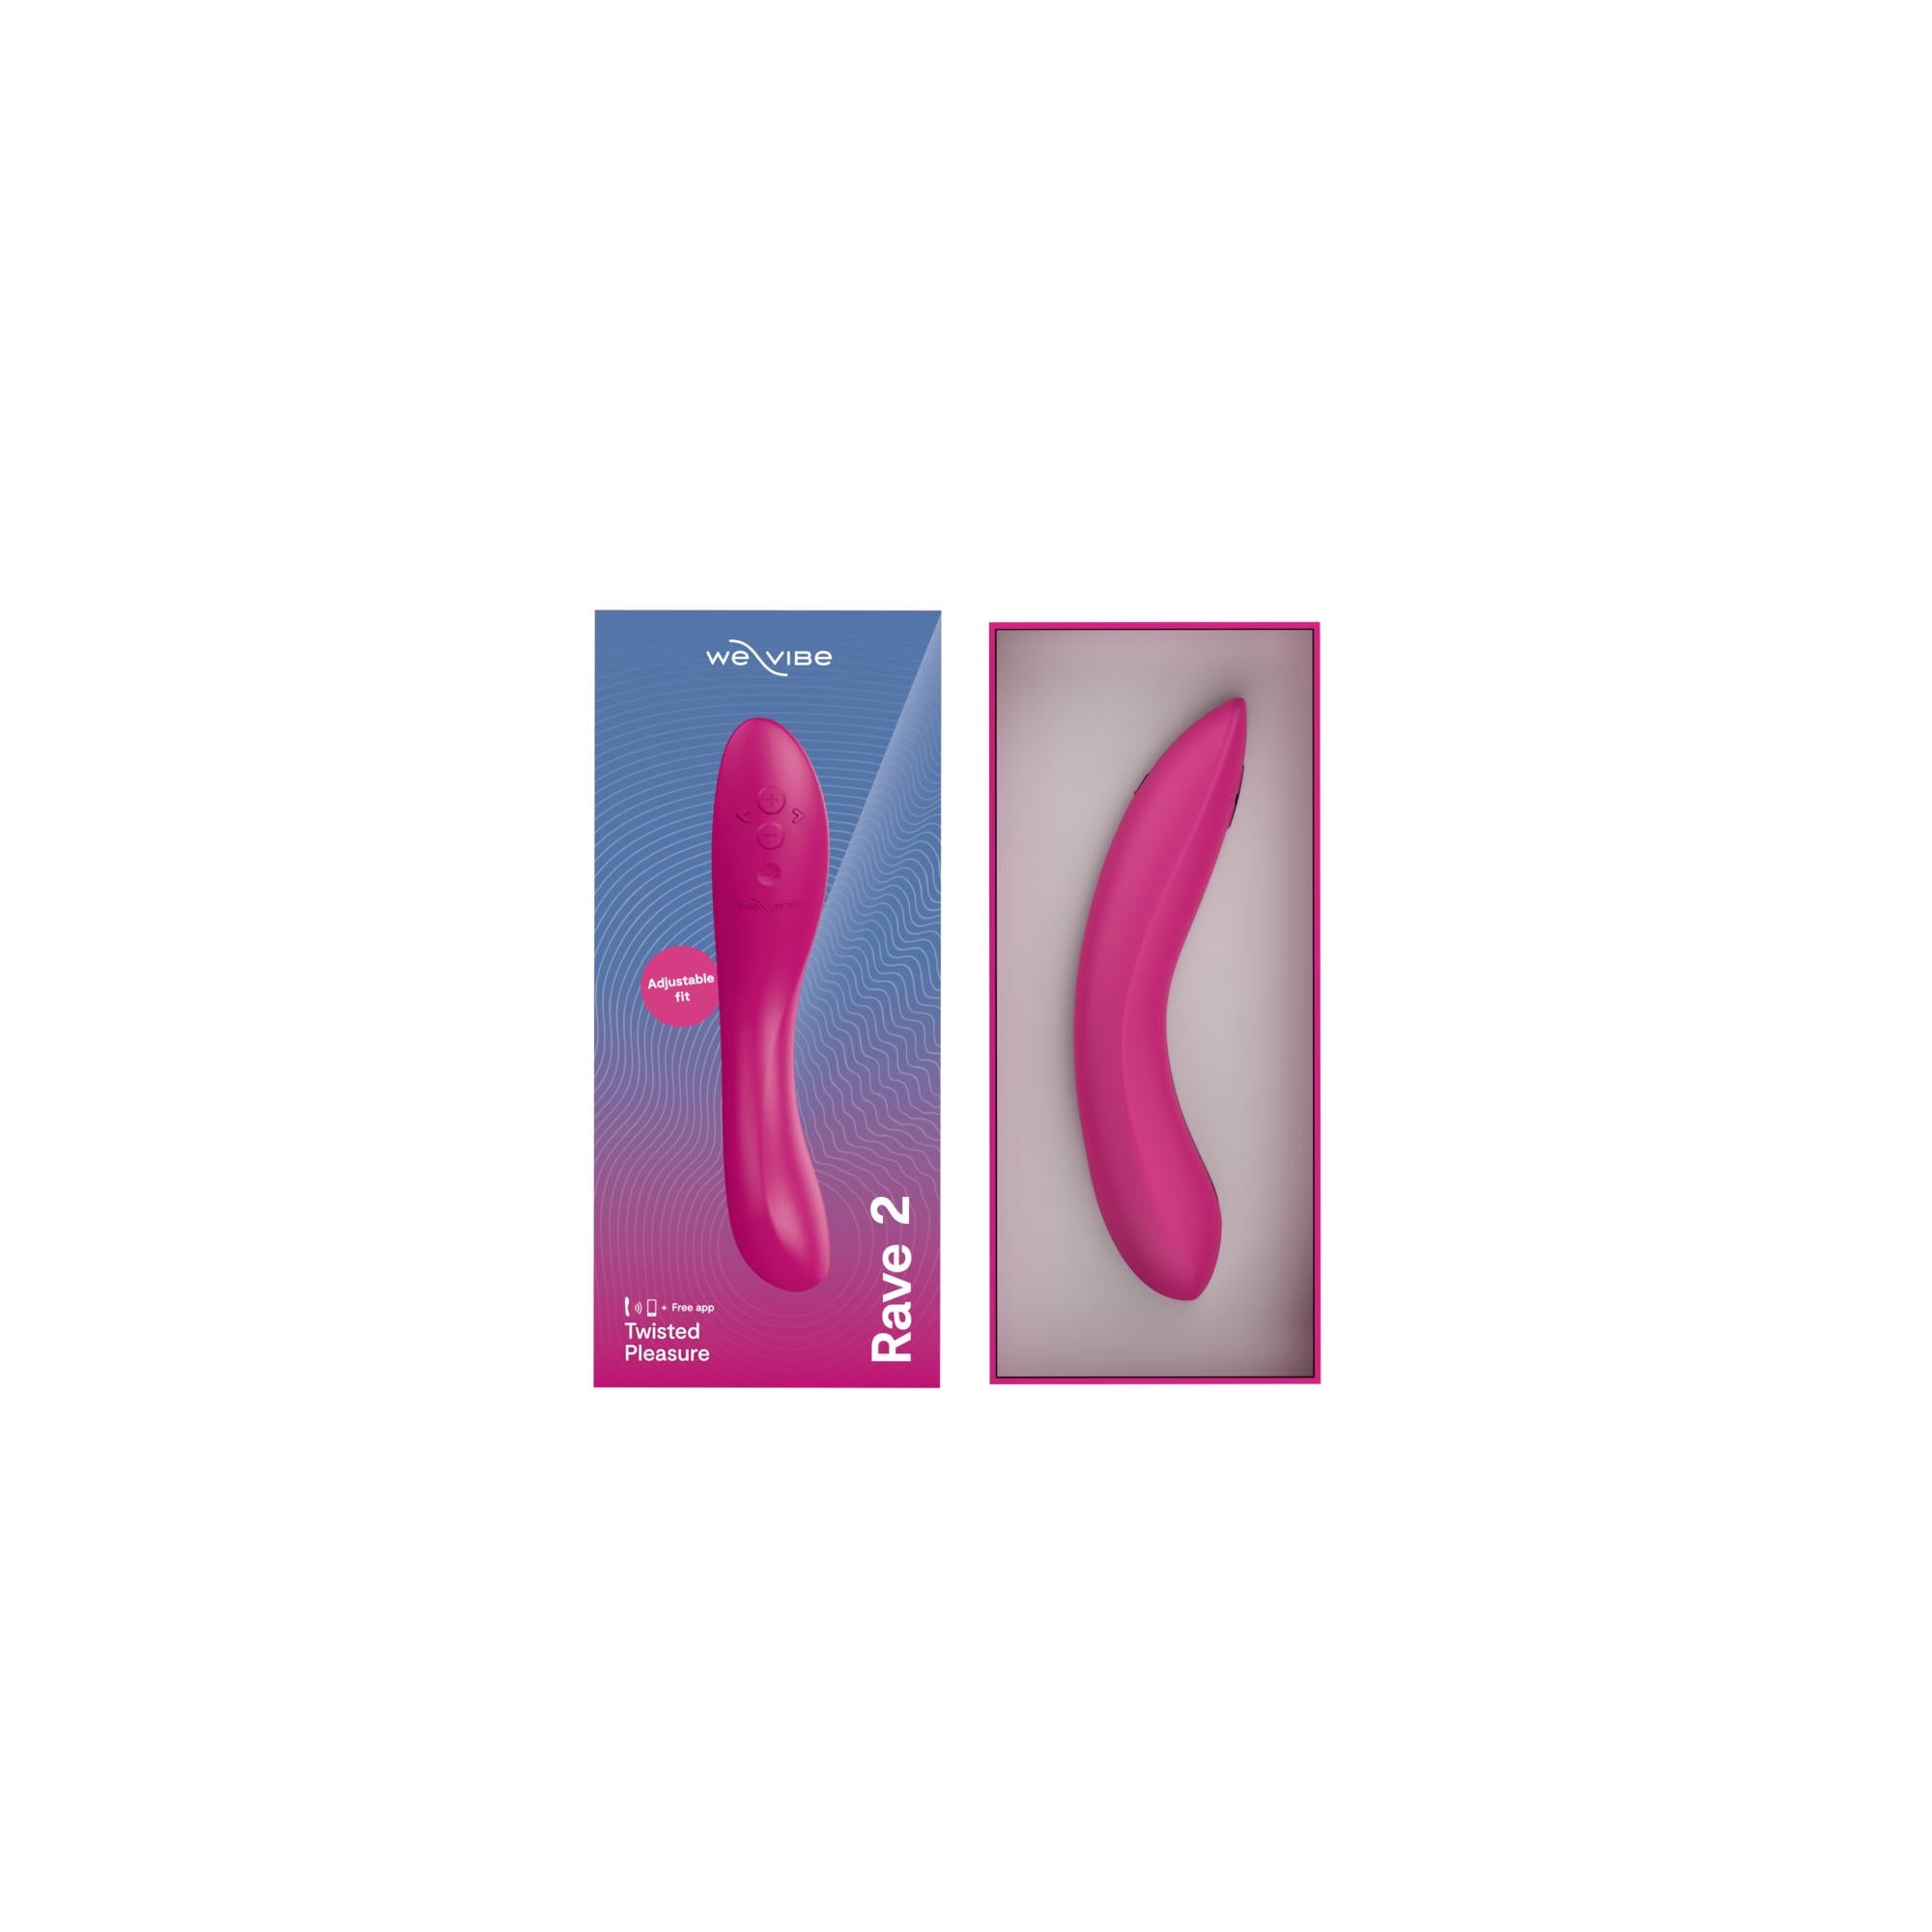 We-Vibe Rave 2 Twisted Pleasure Rechargeable Silicone G-Spot Vibrator